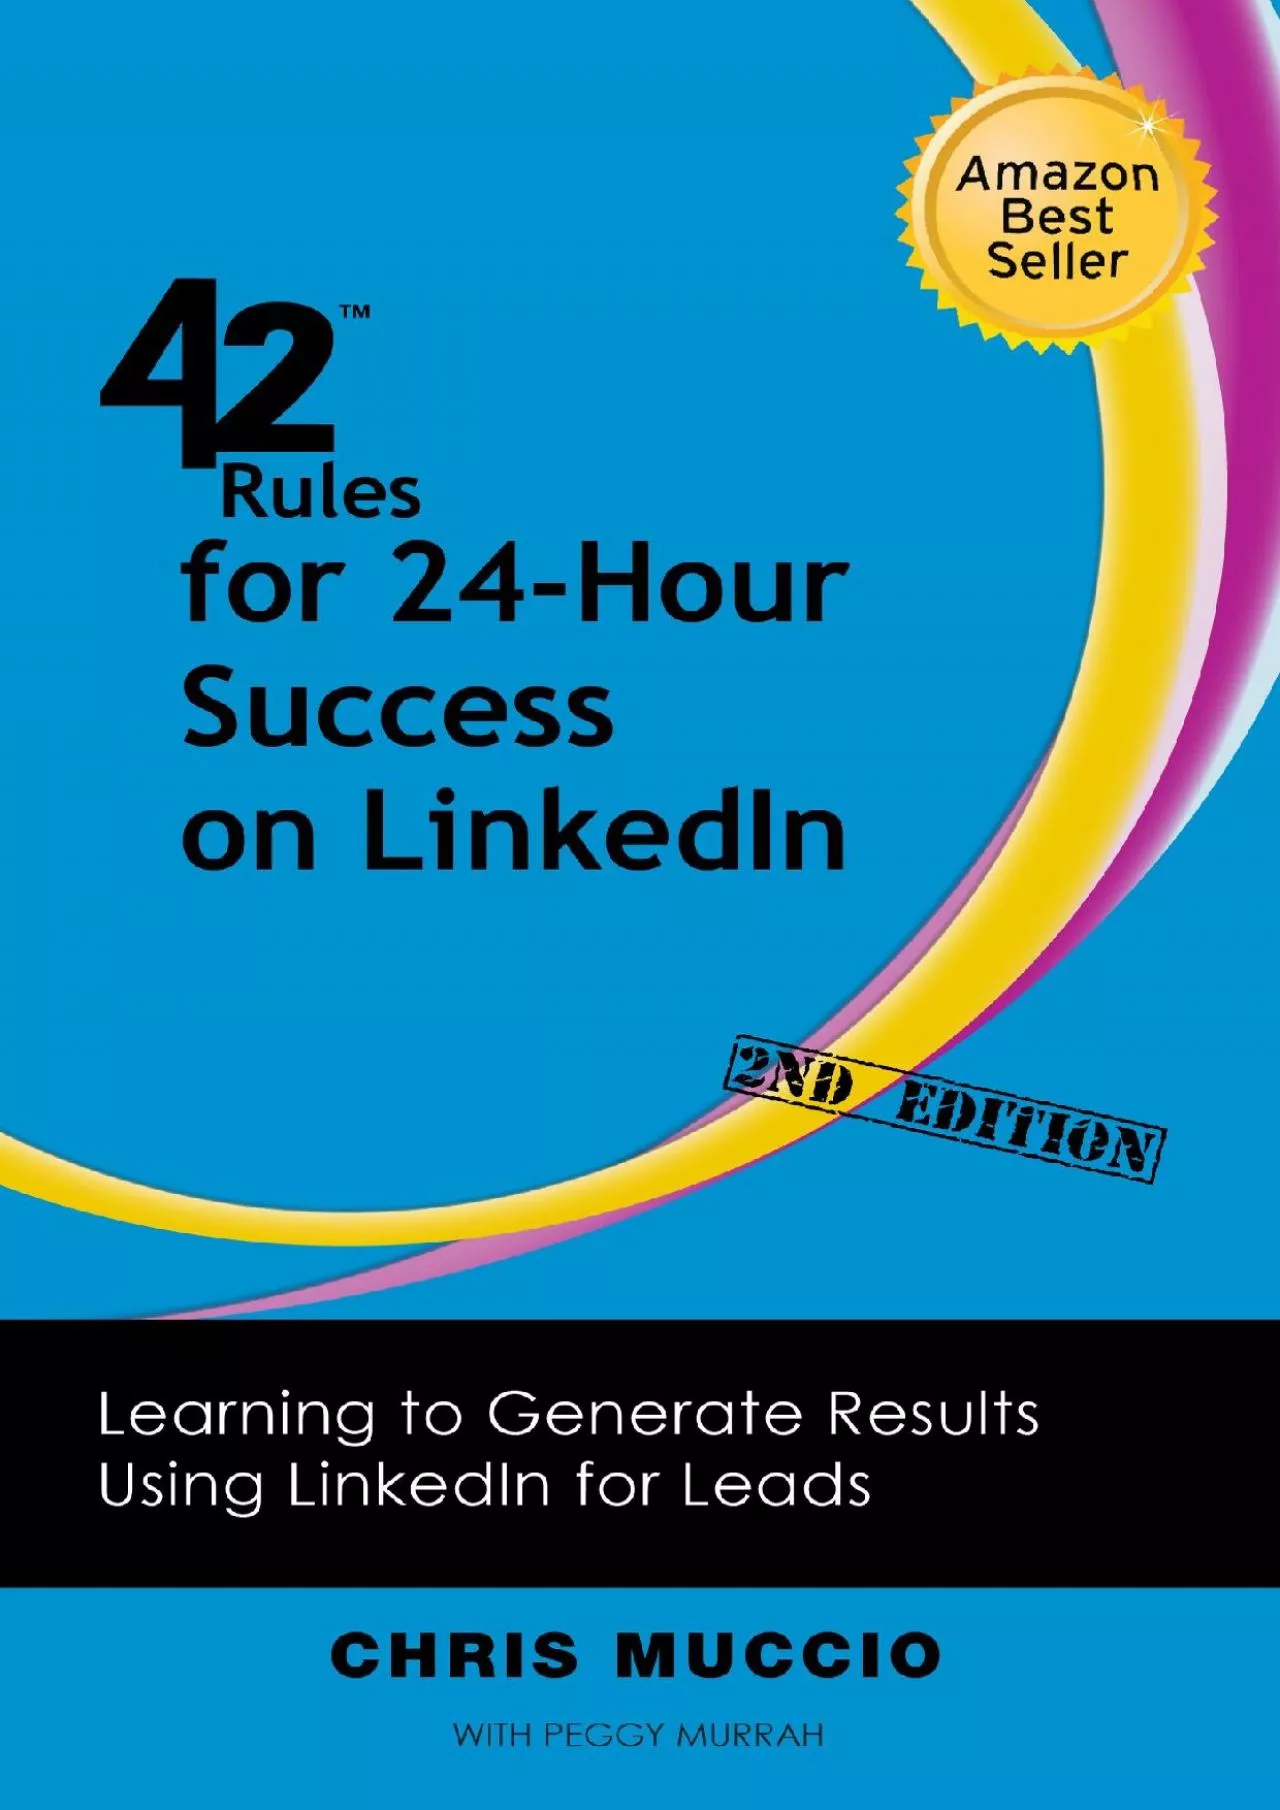 42 Rules for 24-Hour Success on LinkedIn (2nd Edition): Learning to Generate Results Using